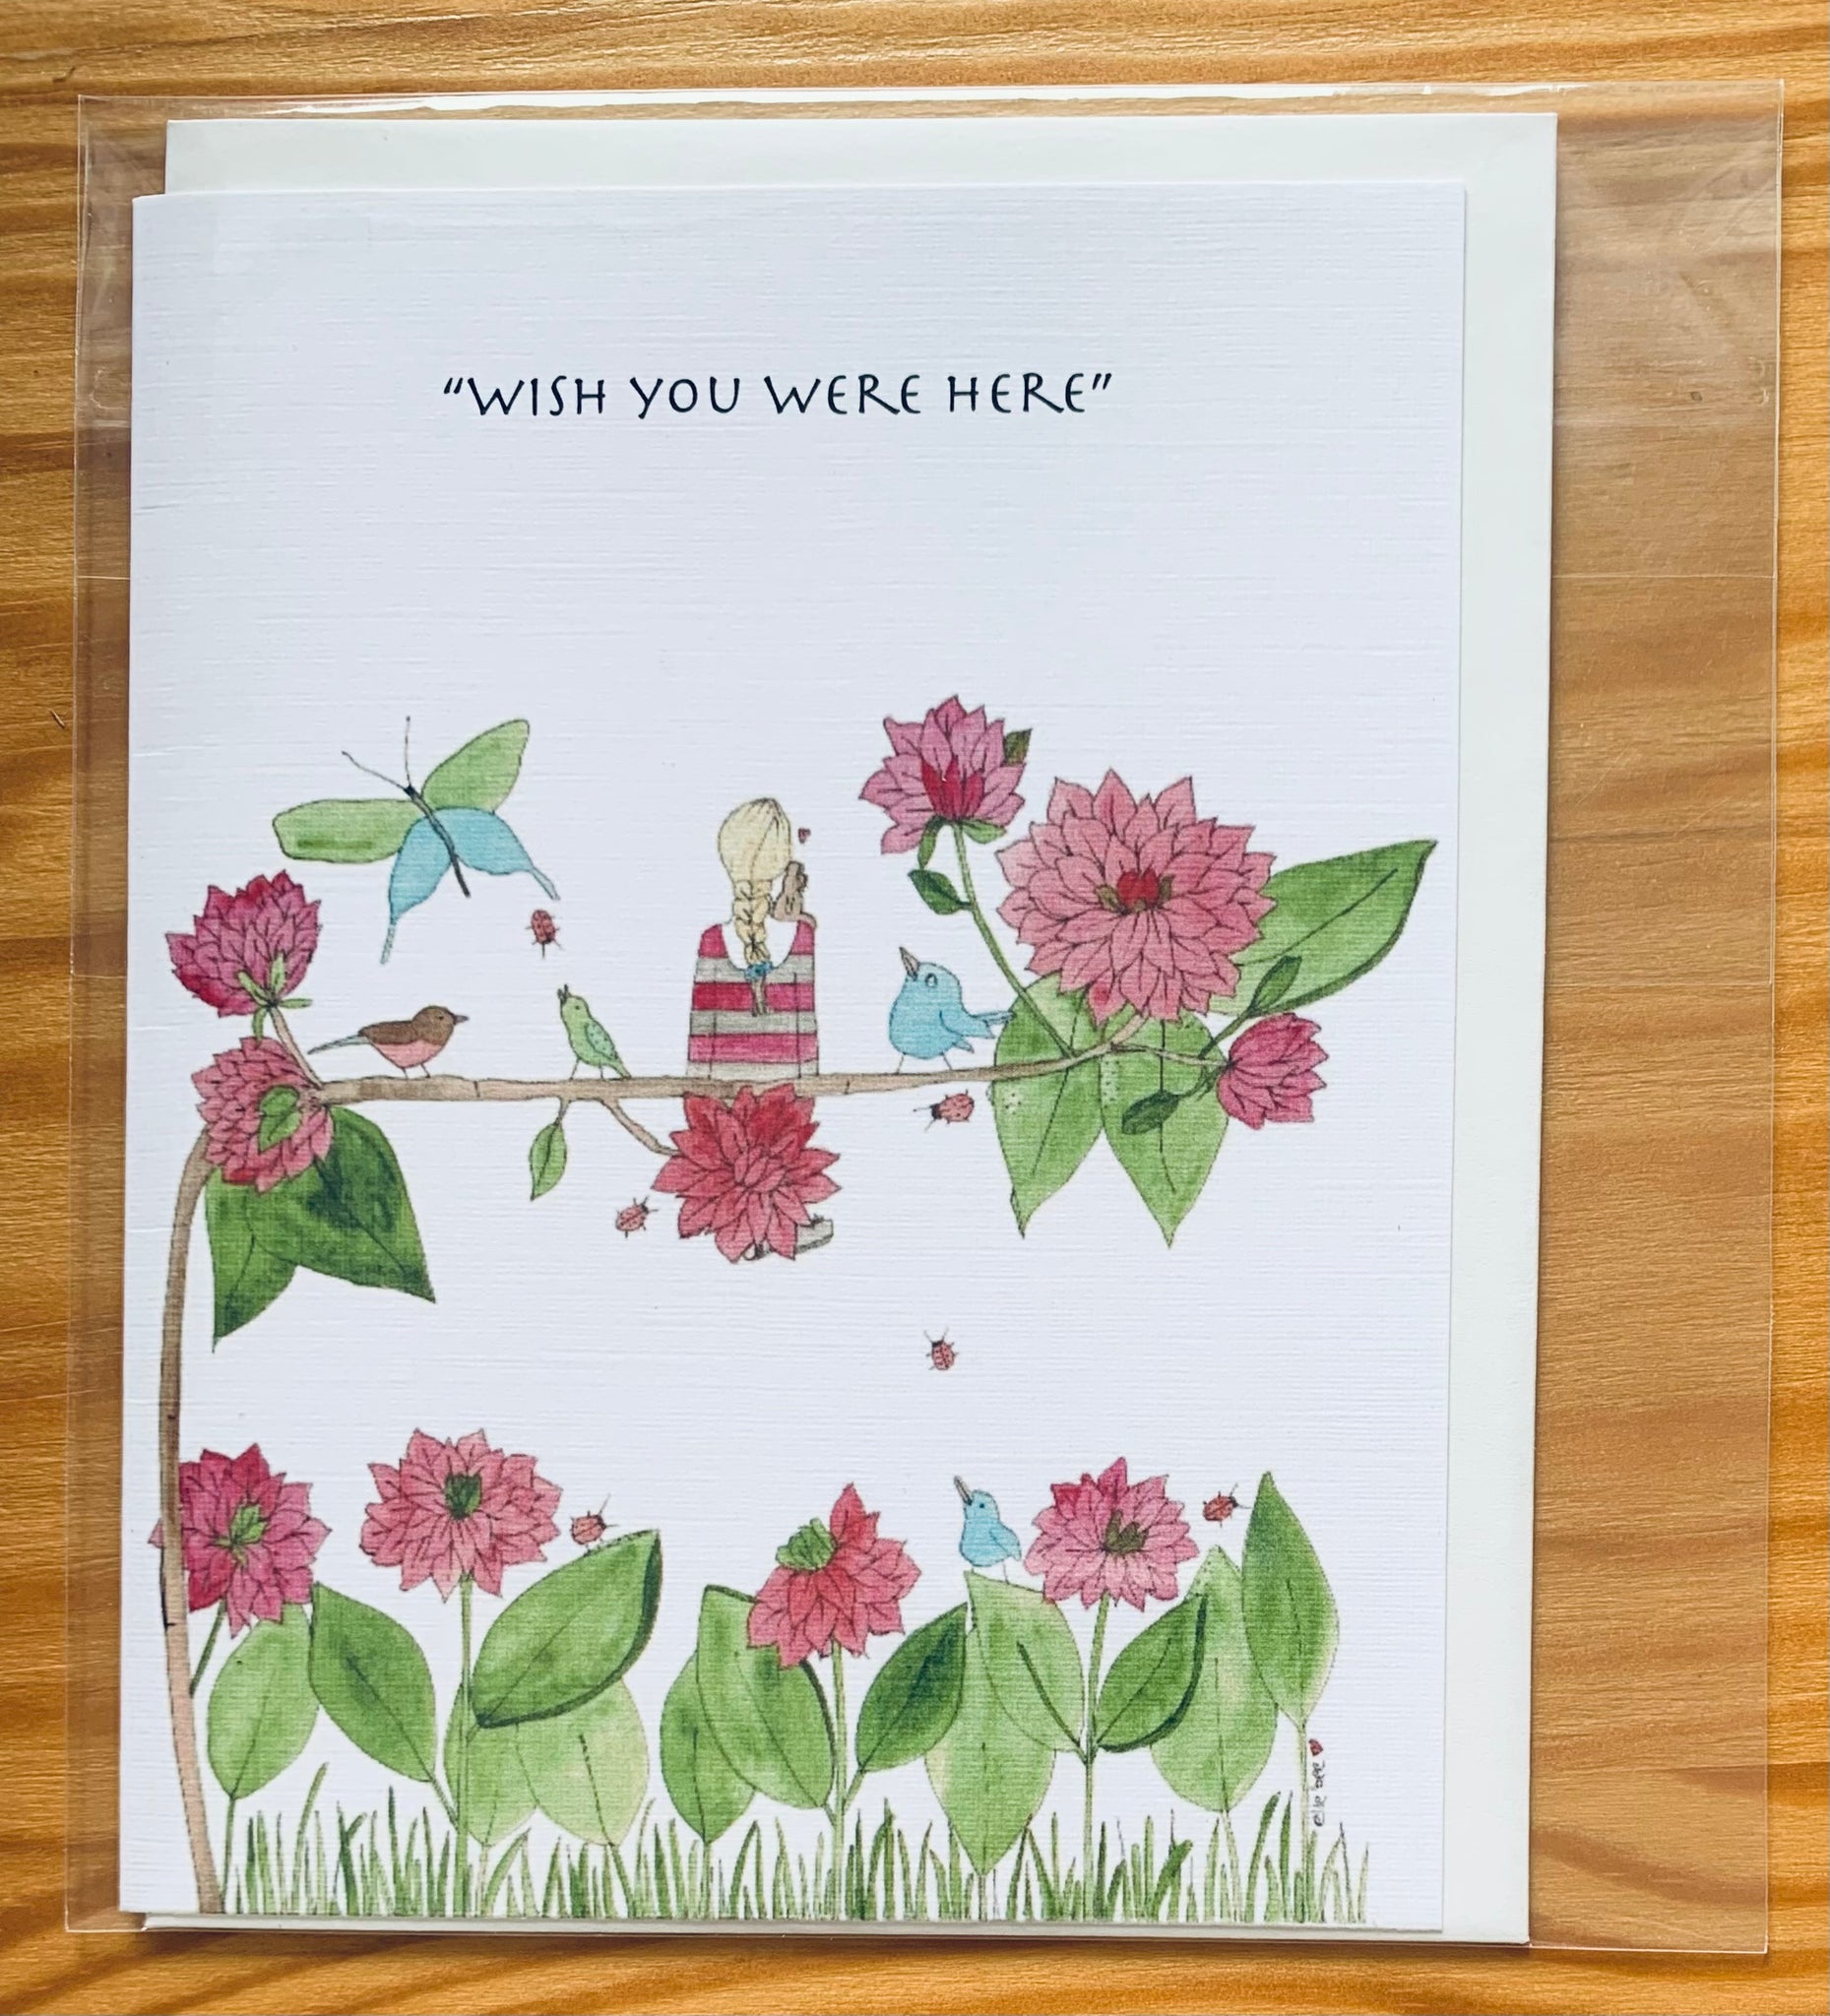 "Wish you were here (Girl & Maisy)" greeting card